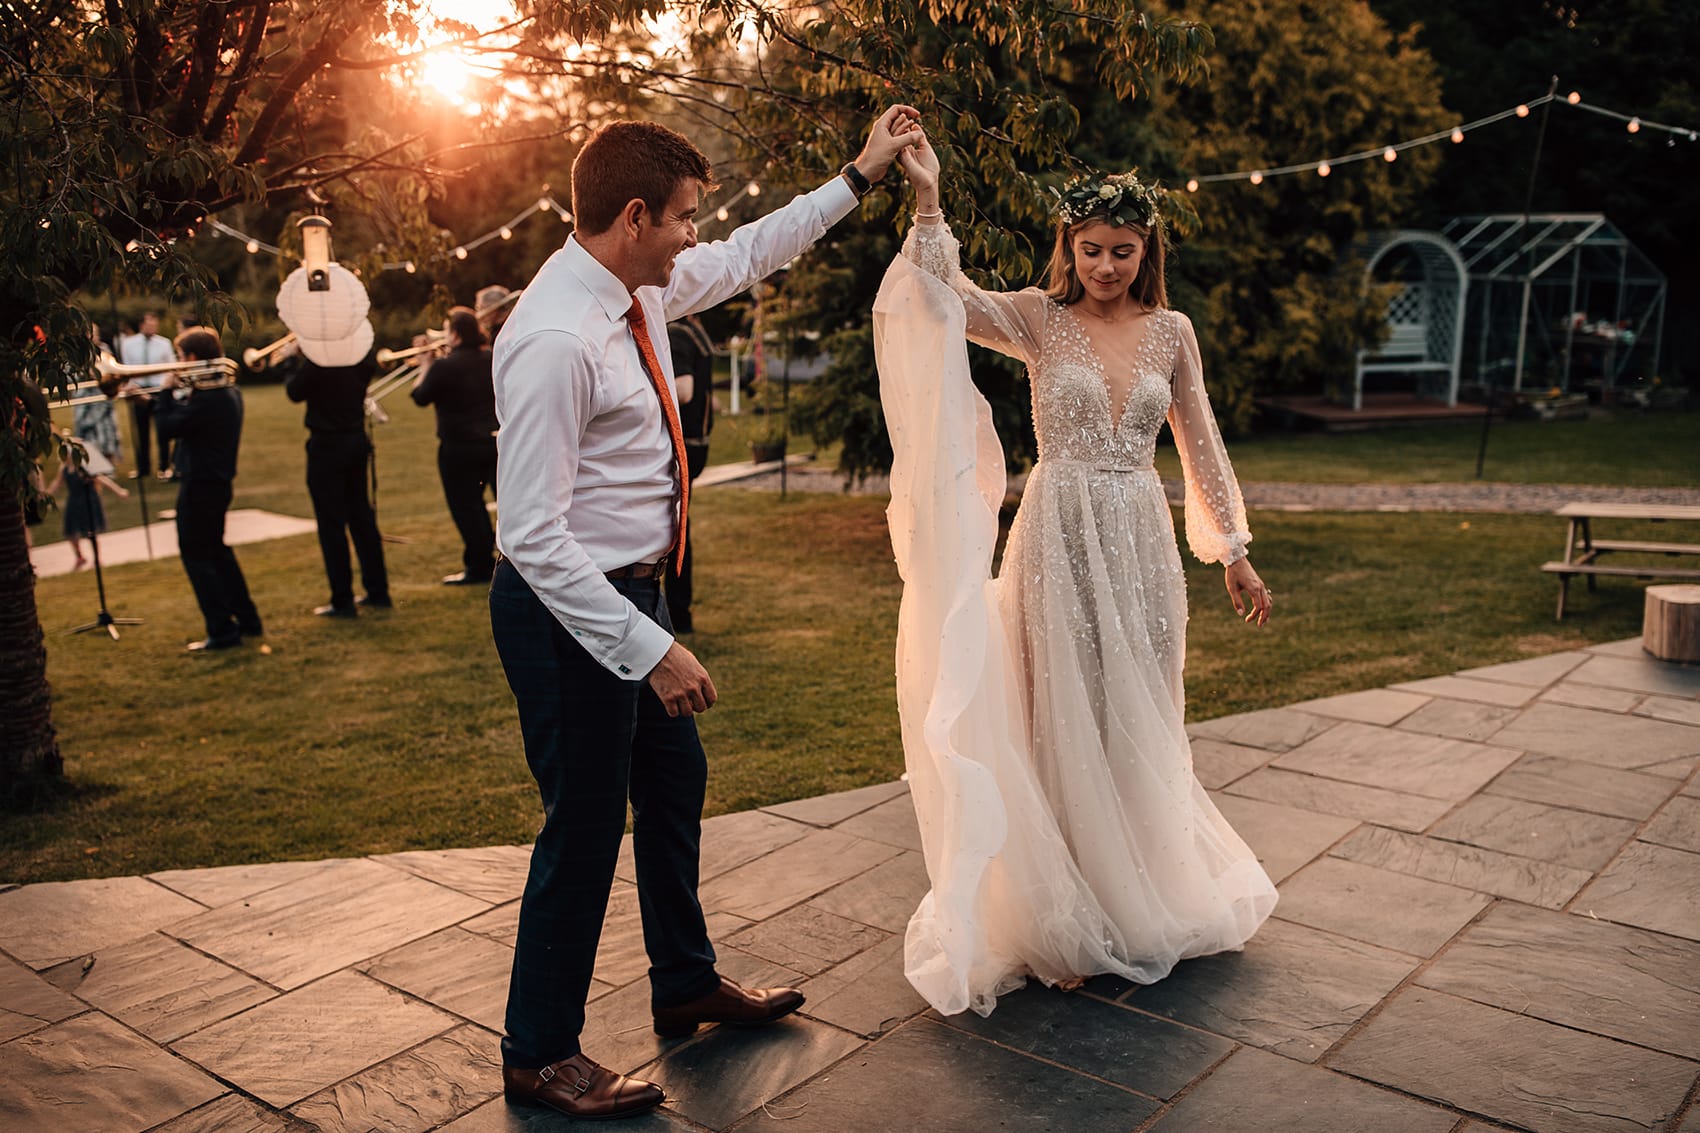 festival style wedding dancing outdoors photography